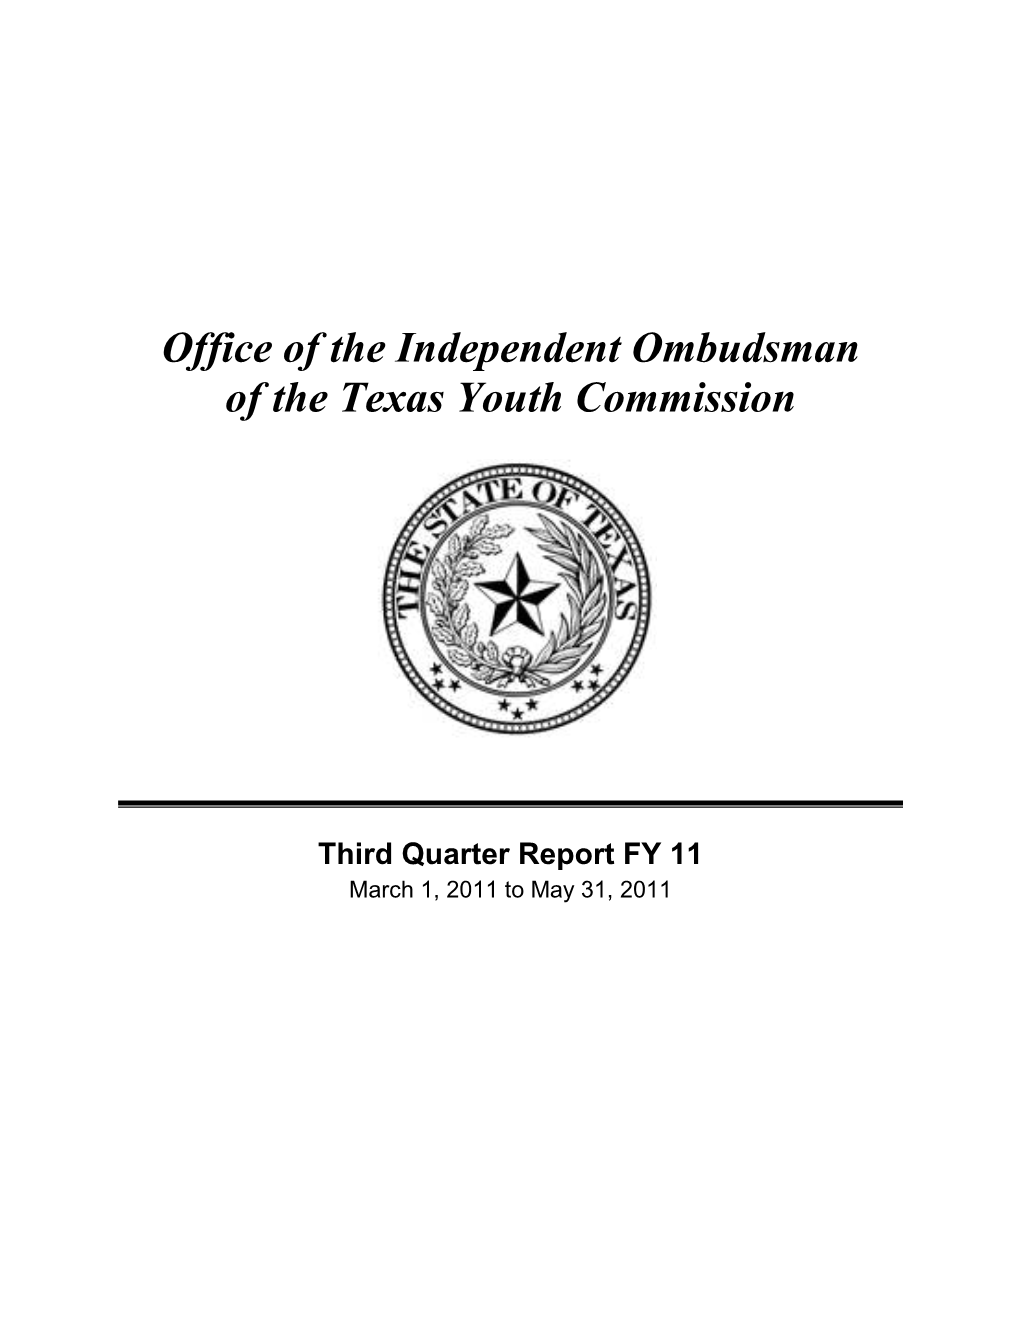 Office of the Independent Ombudsman of the Texas Youth Commission